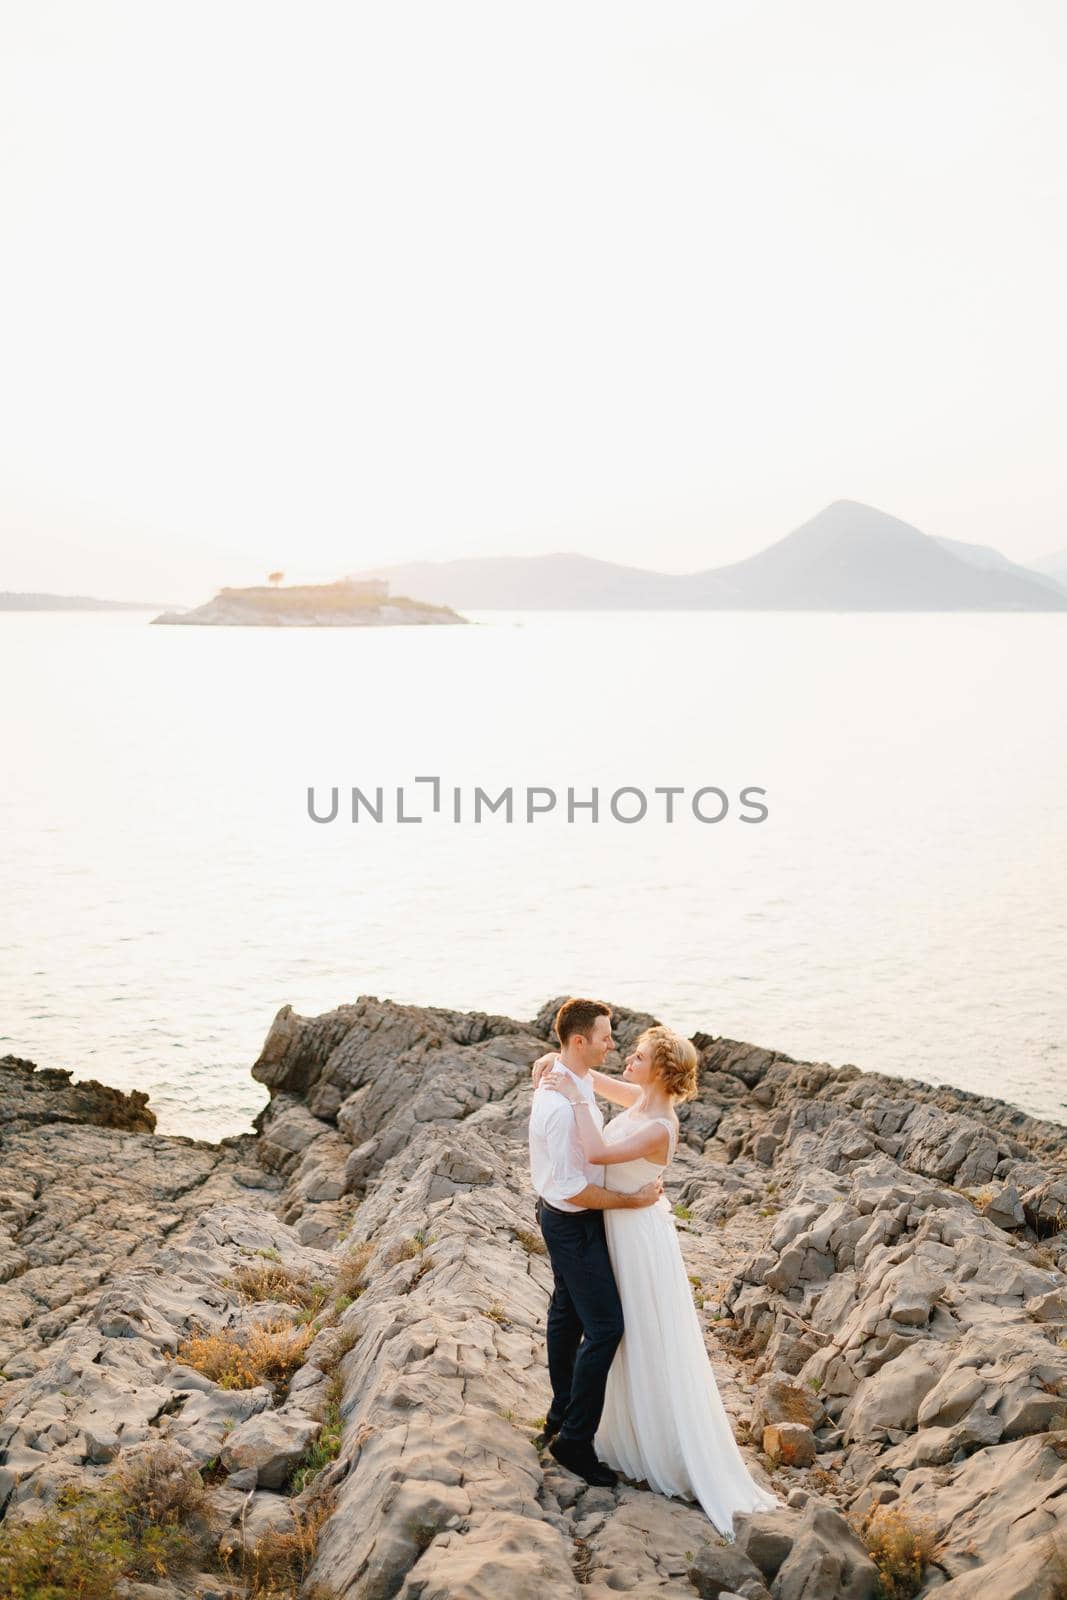 The bride and groom hug on the rocks by the sea against the backdrop of the mountains and the island of Mamula by Nadtochiy